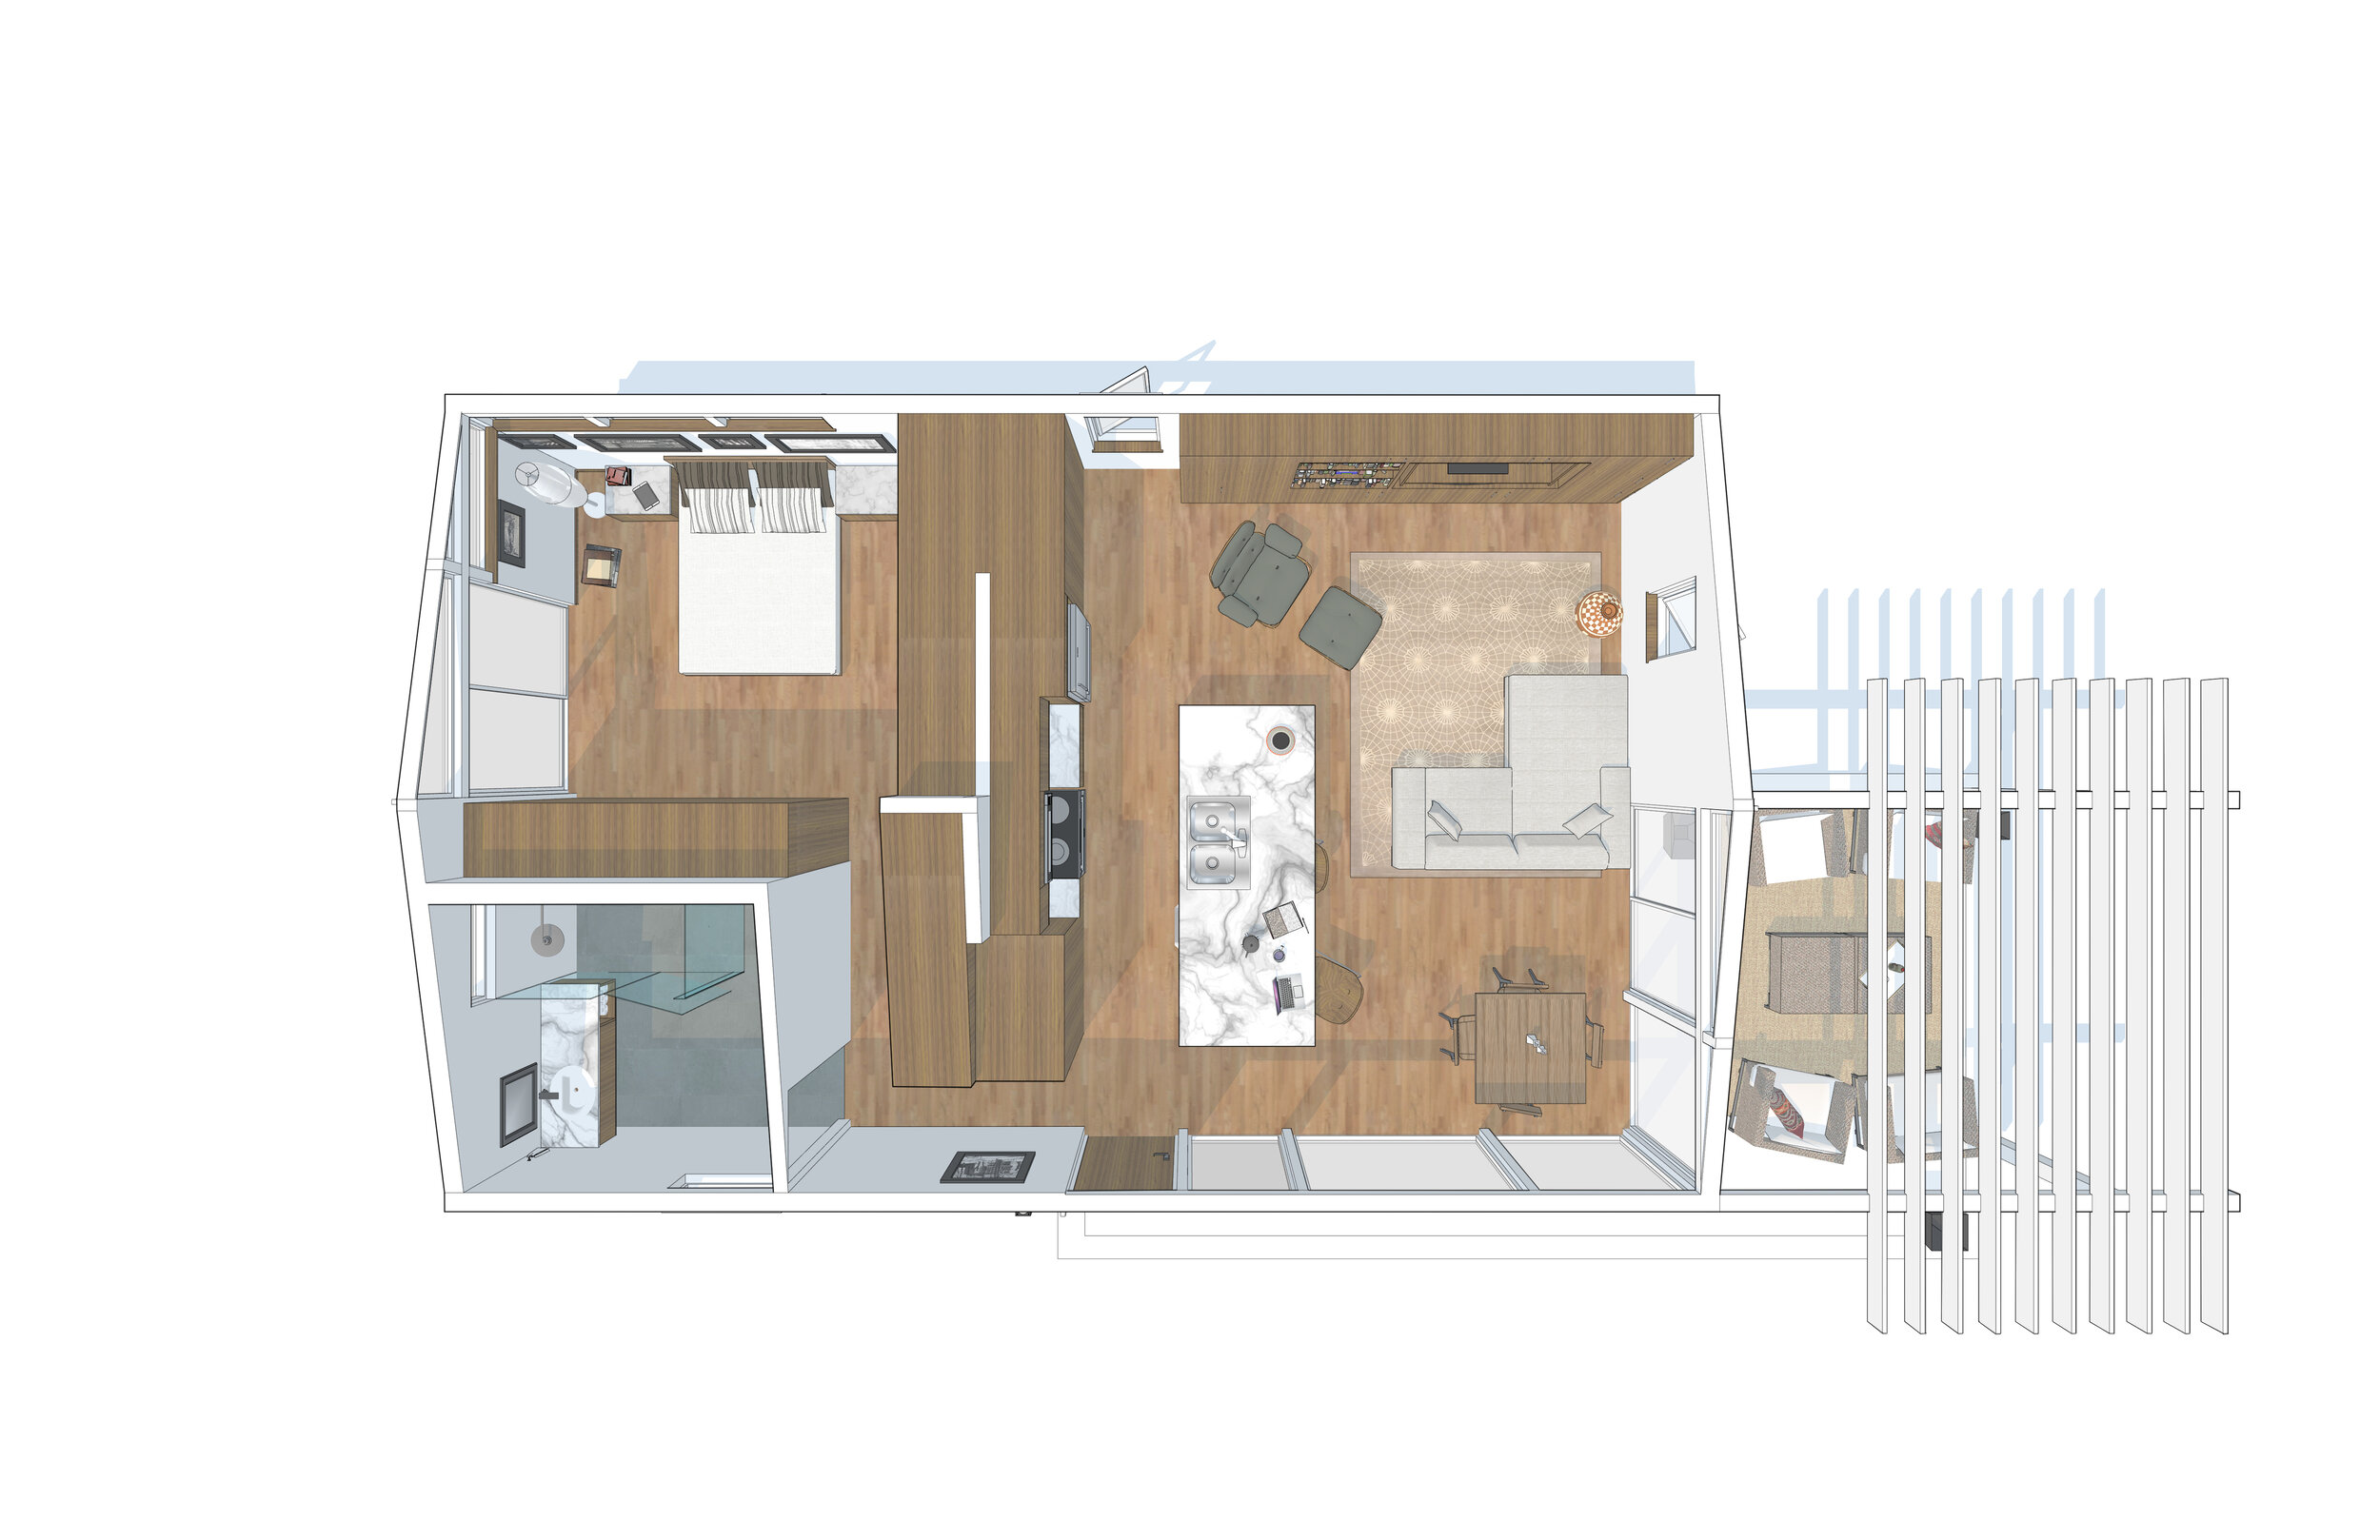   Accessible and comfortable plan utilizes casework “core” to separate living and sleeping spaces which contains kitchenette, laundry, and closet space. Accessible bathroom includes roll-in shower.  